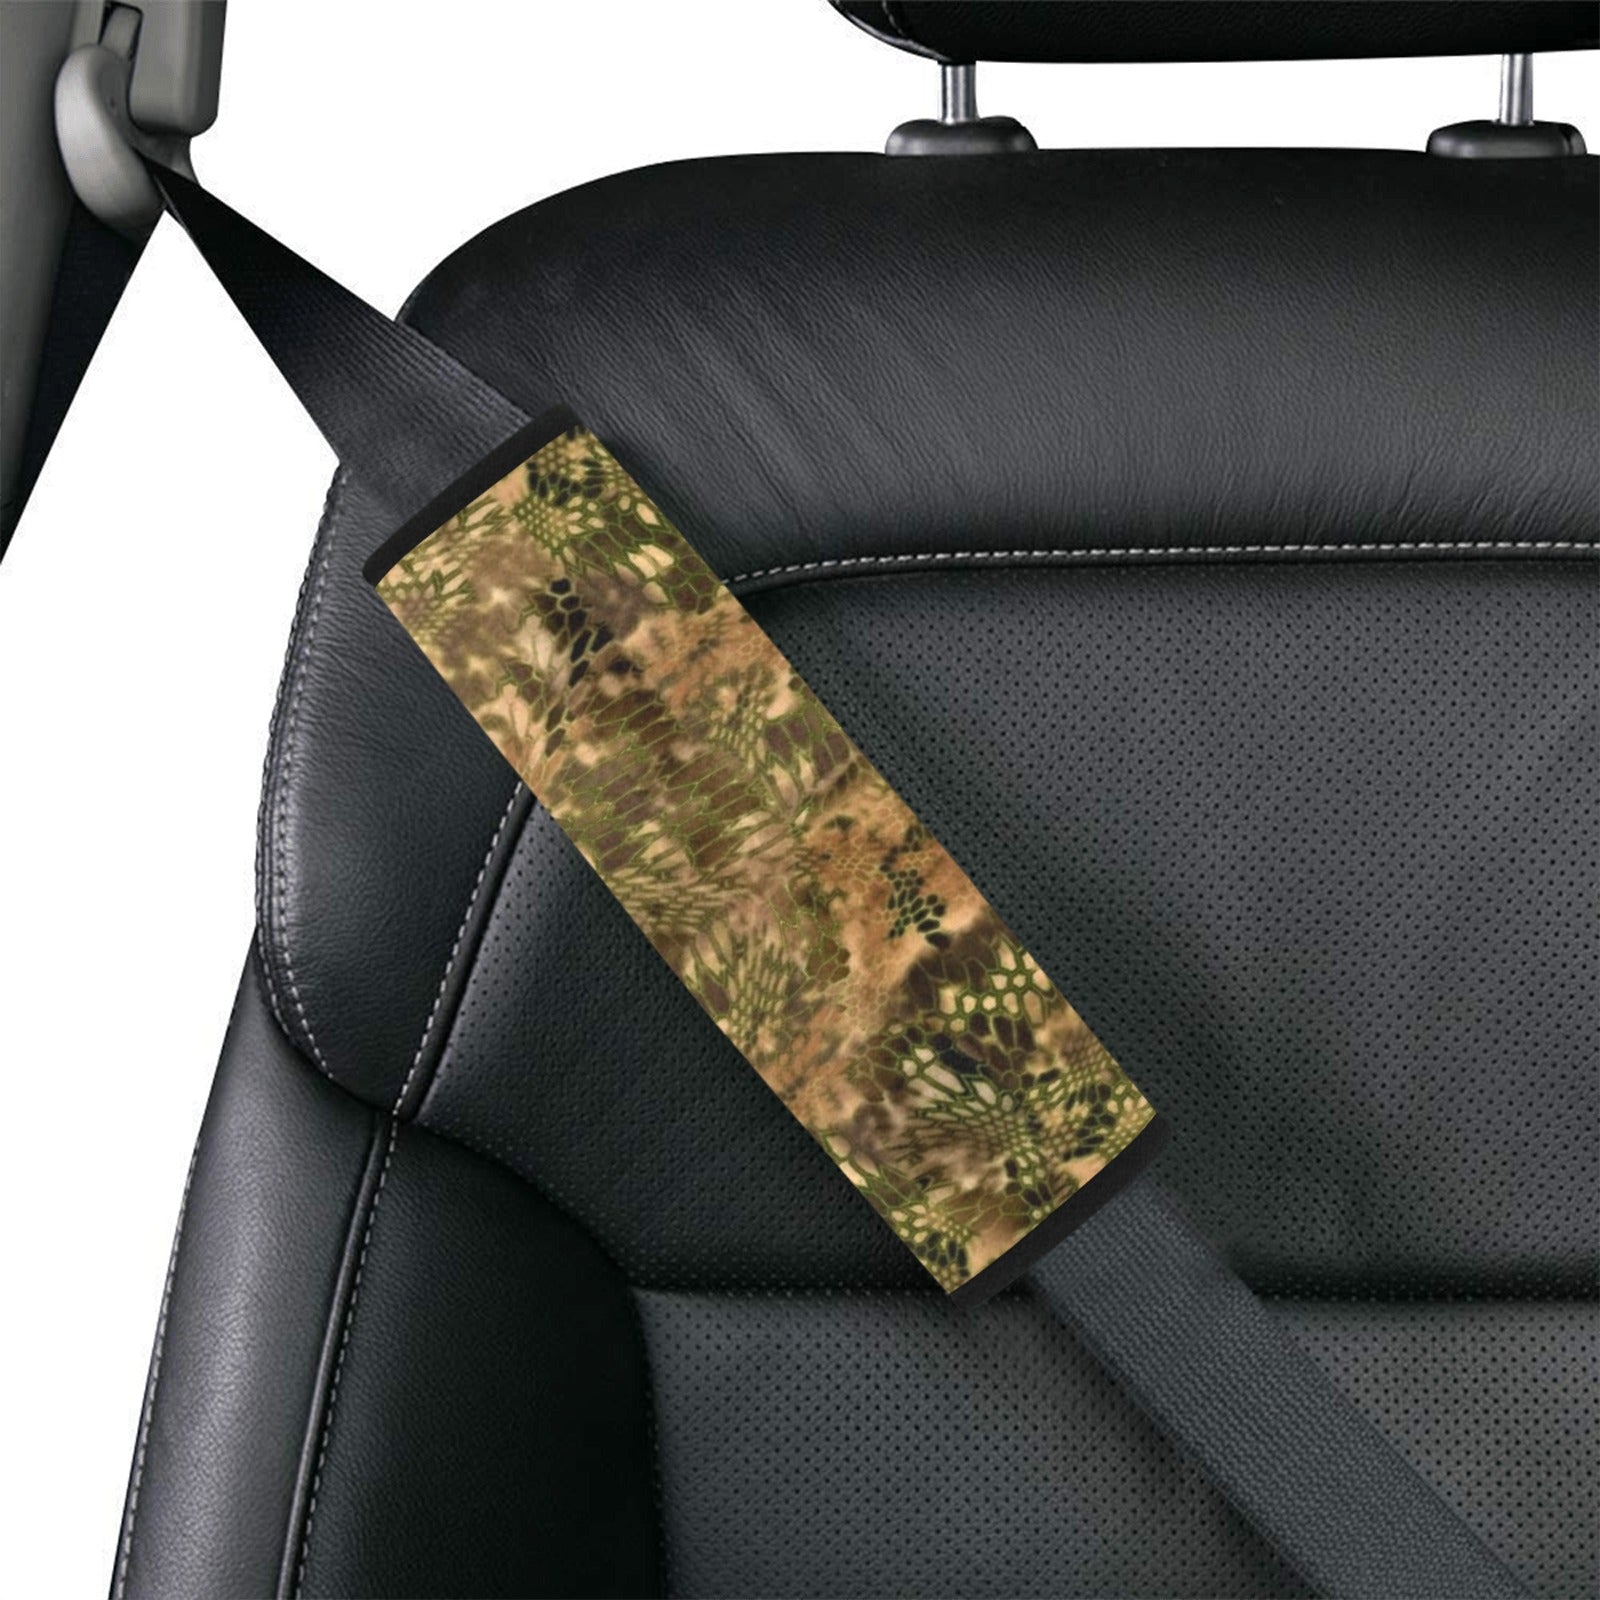 Dry Country Camo Seat Belt Cover 7" x 10"